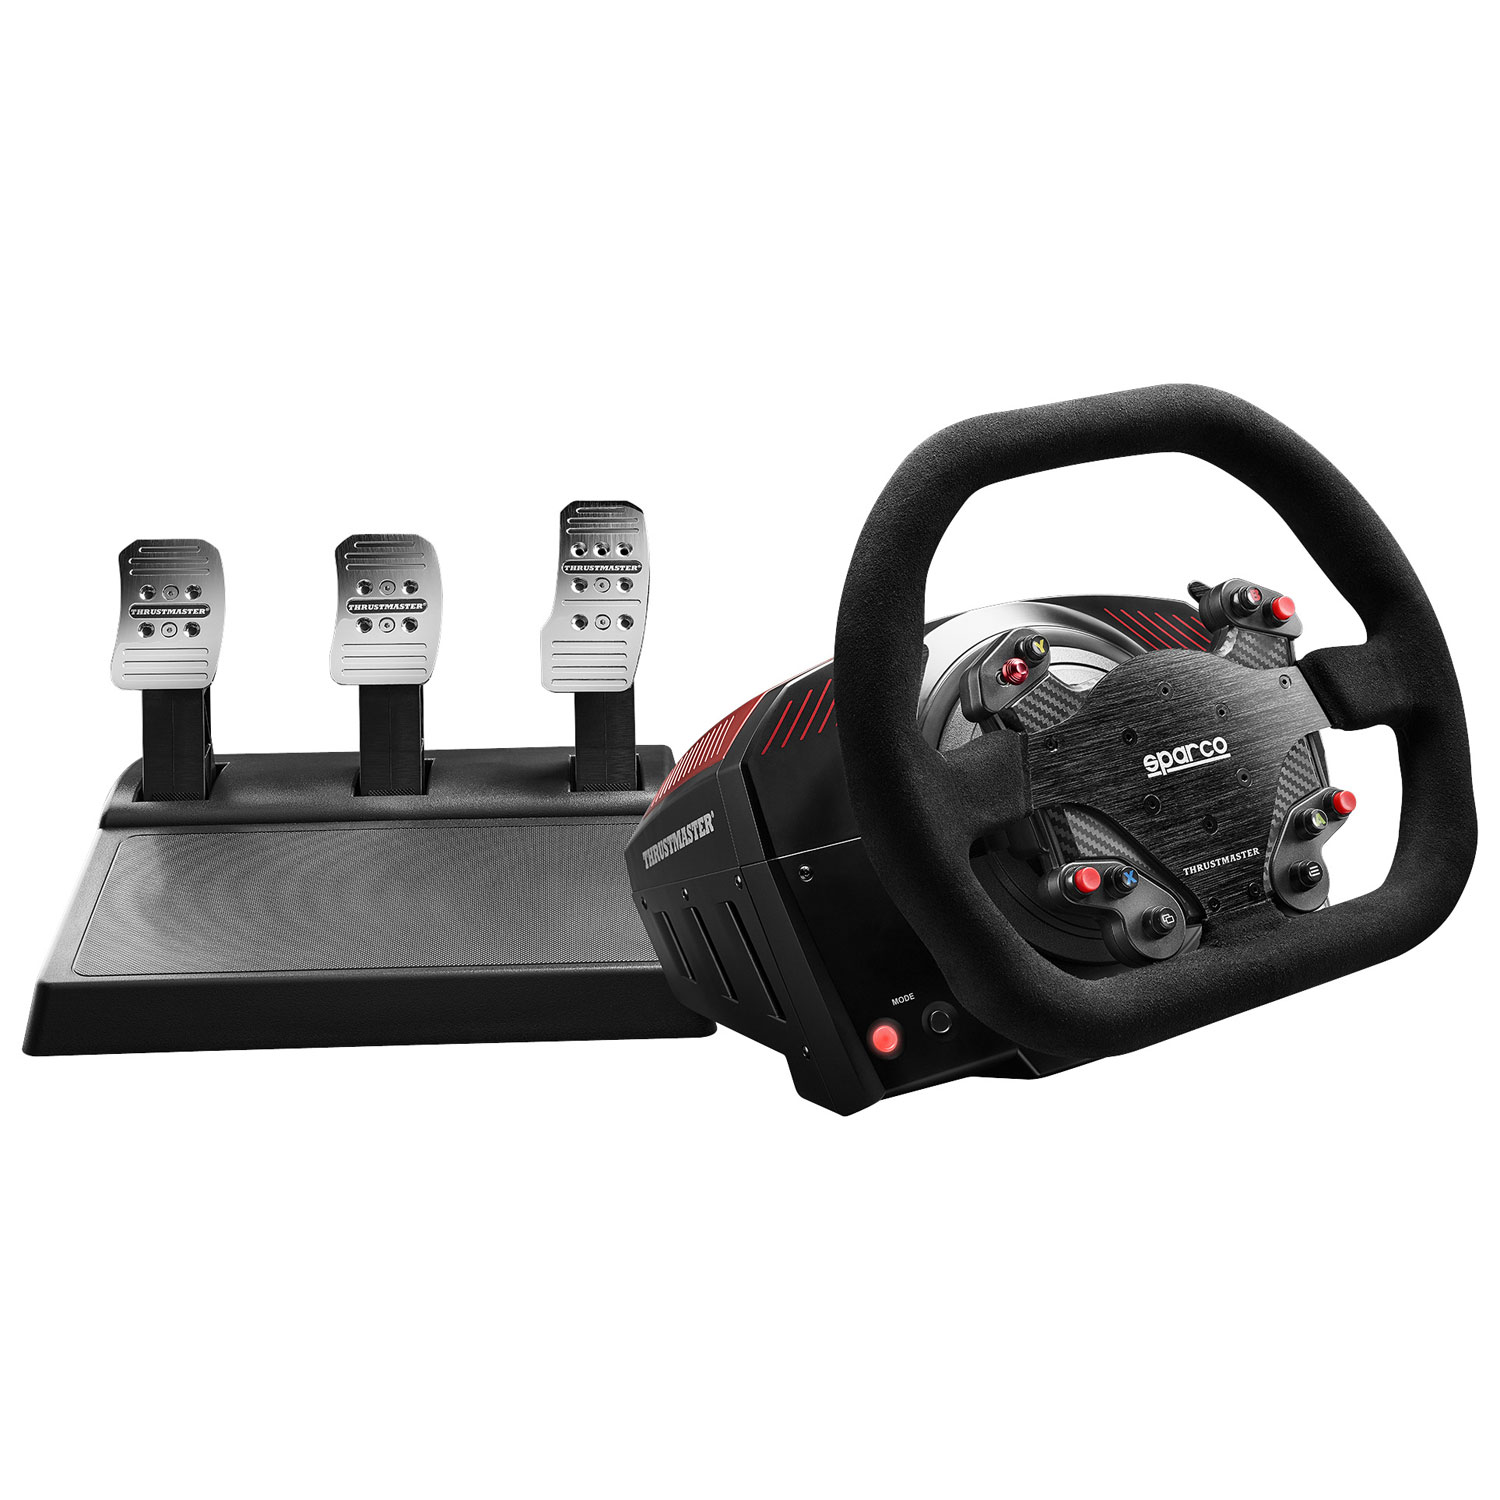 Thrustmaster TS-XW Racer Sparco P310 Competition Mod Driving Wheel